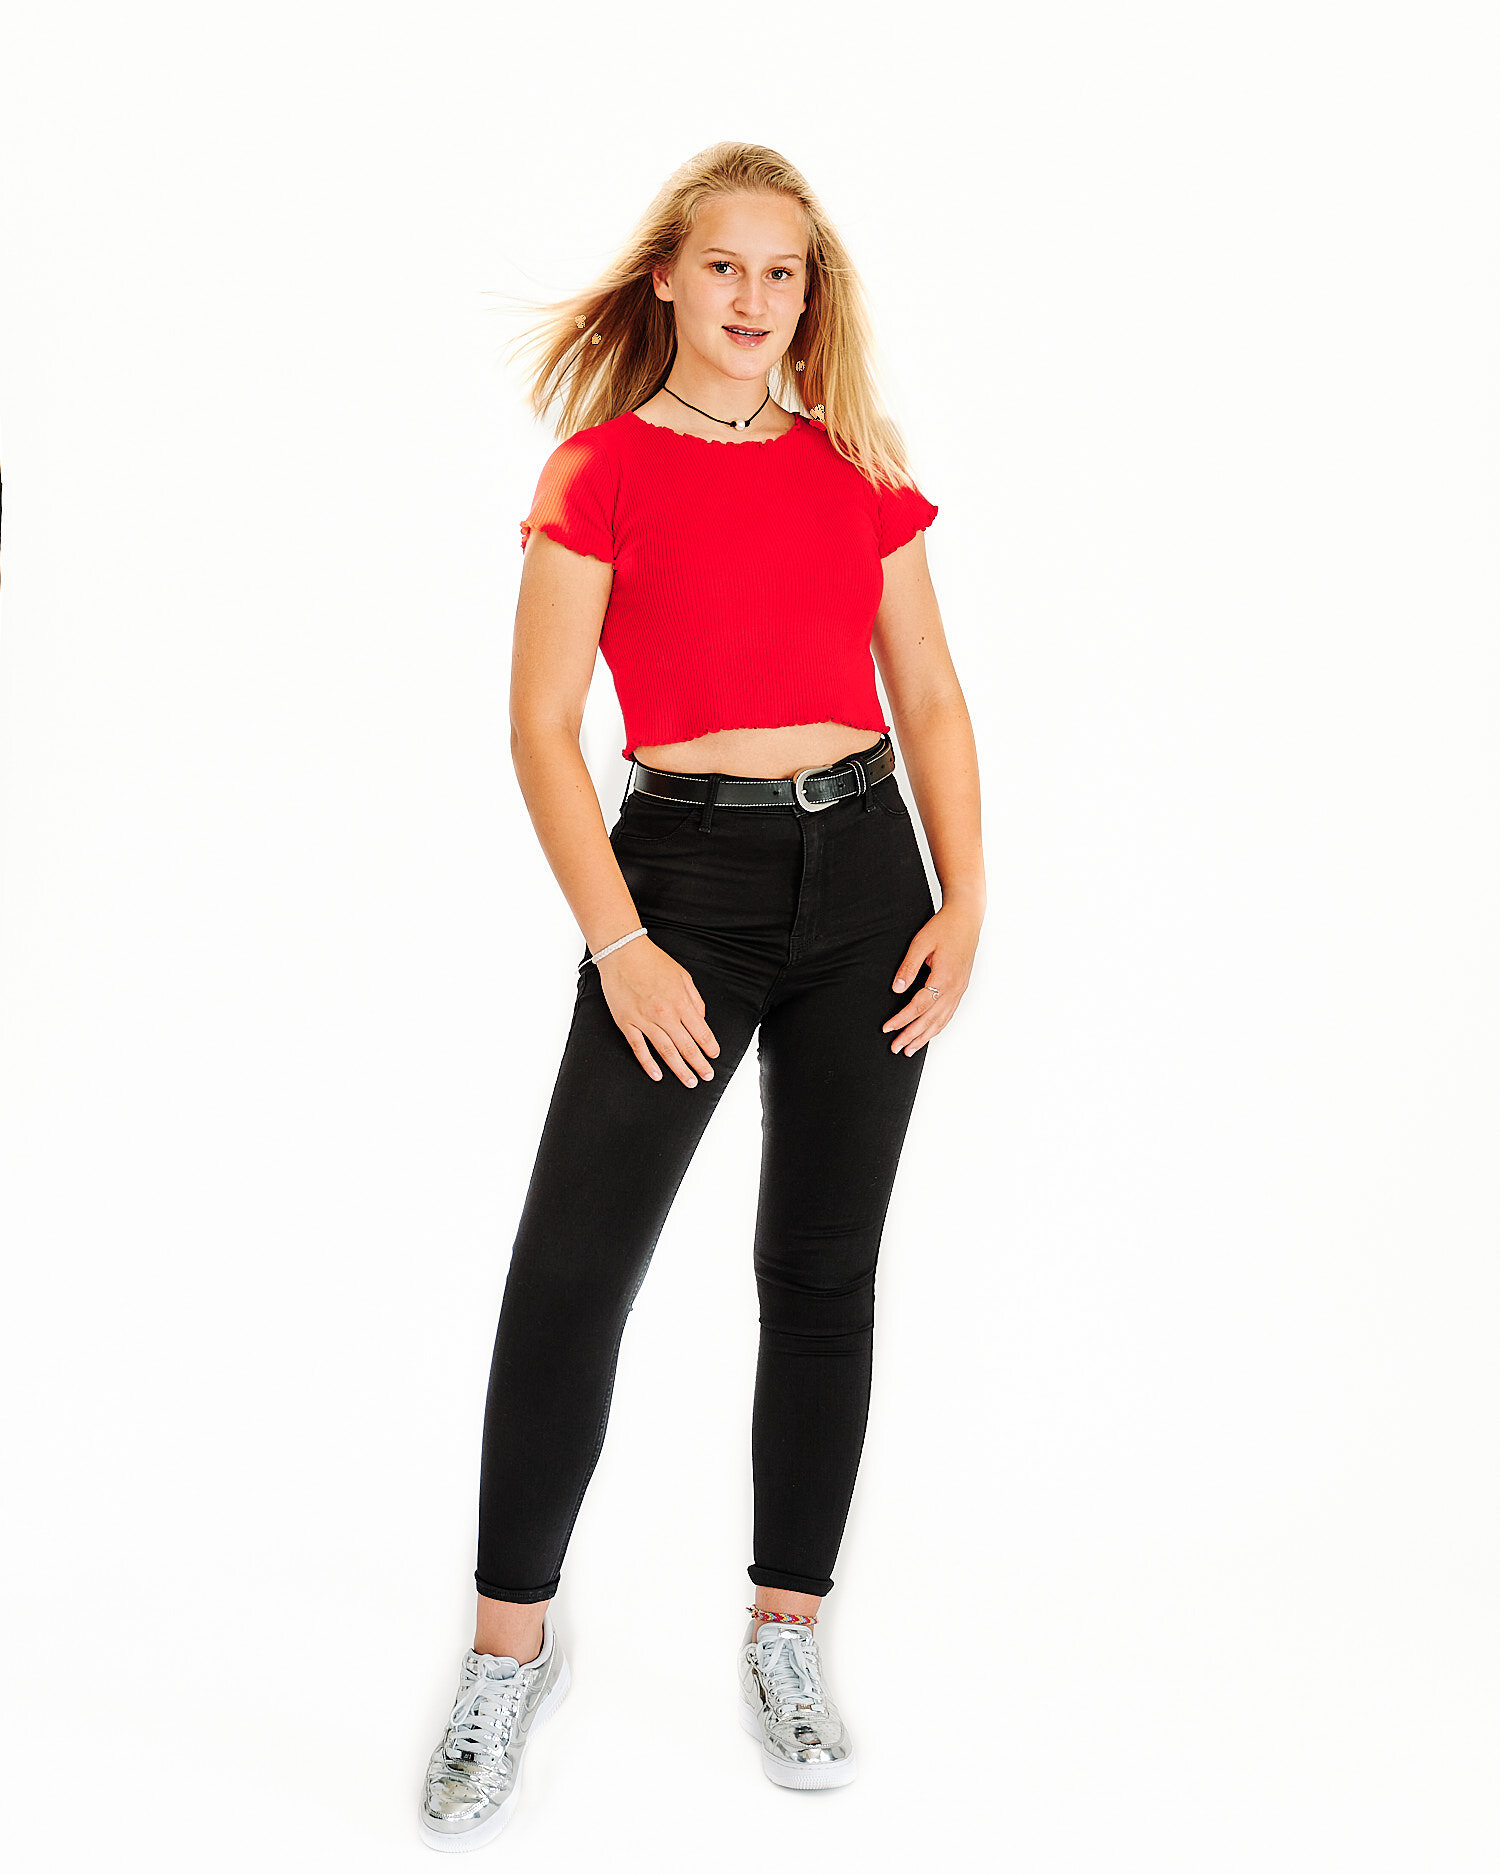  Alena Gurevich is posing for high key full-length portraits with Golden Retriever dog Joyka in a professional photo studio in Sewickley Pennsylvania near Pittsburgh in 2020. Wearing in red and black. 